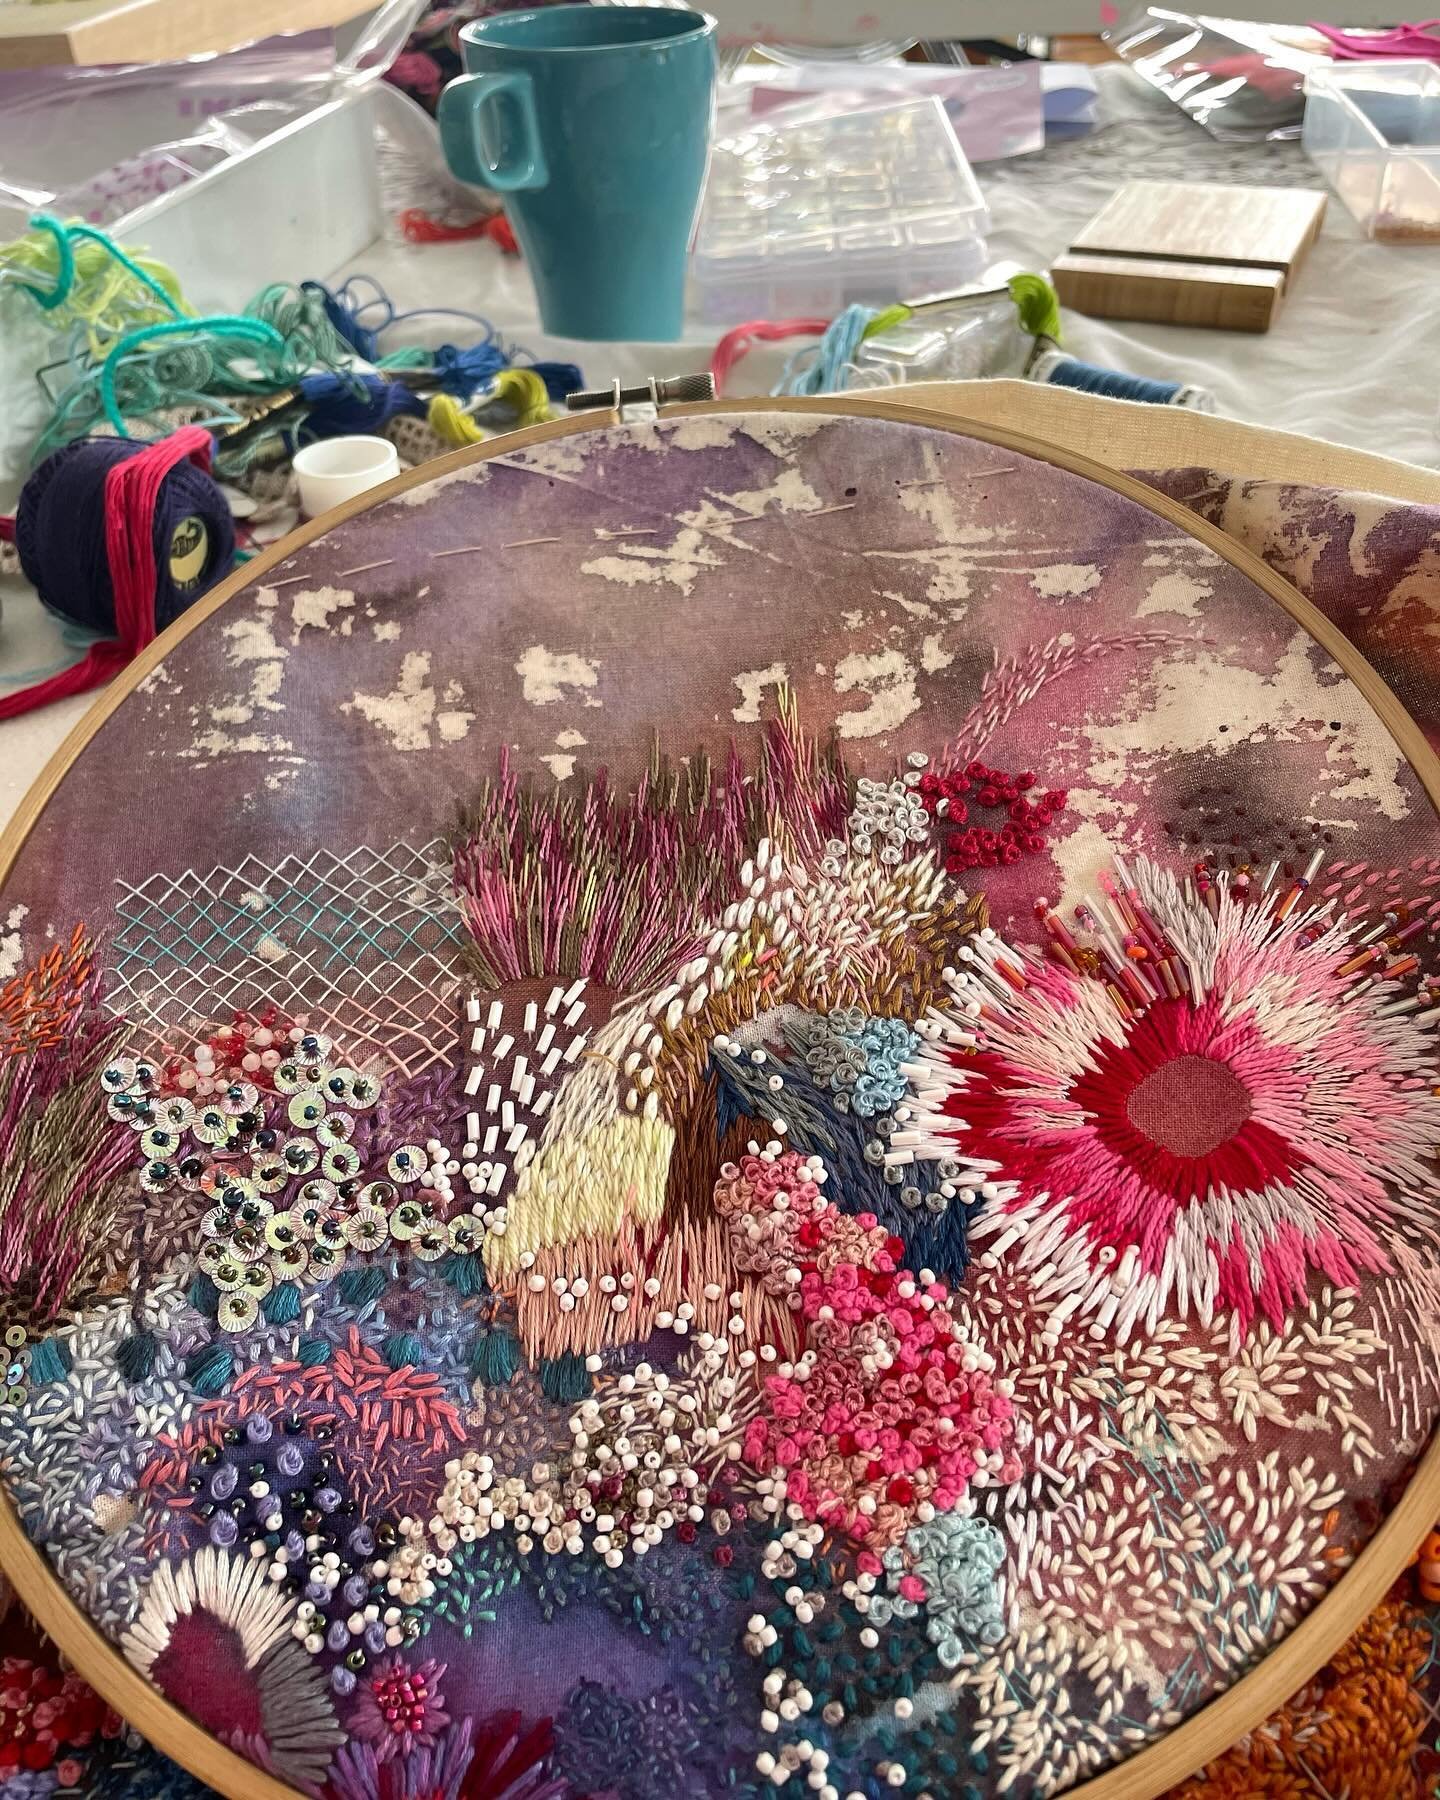 I love to layer upon layer with my stitching. Sometimes it can be messy and chaotic, sometimes neat and structured, but it&rsquo;s almost always an intuitive, organic process for me. The piece finds its way, it weaves and winds and takes me down unpr